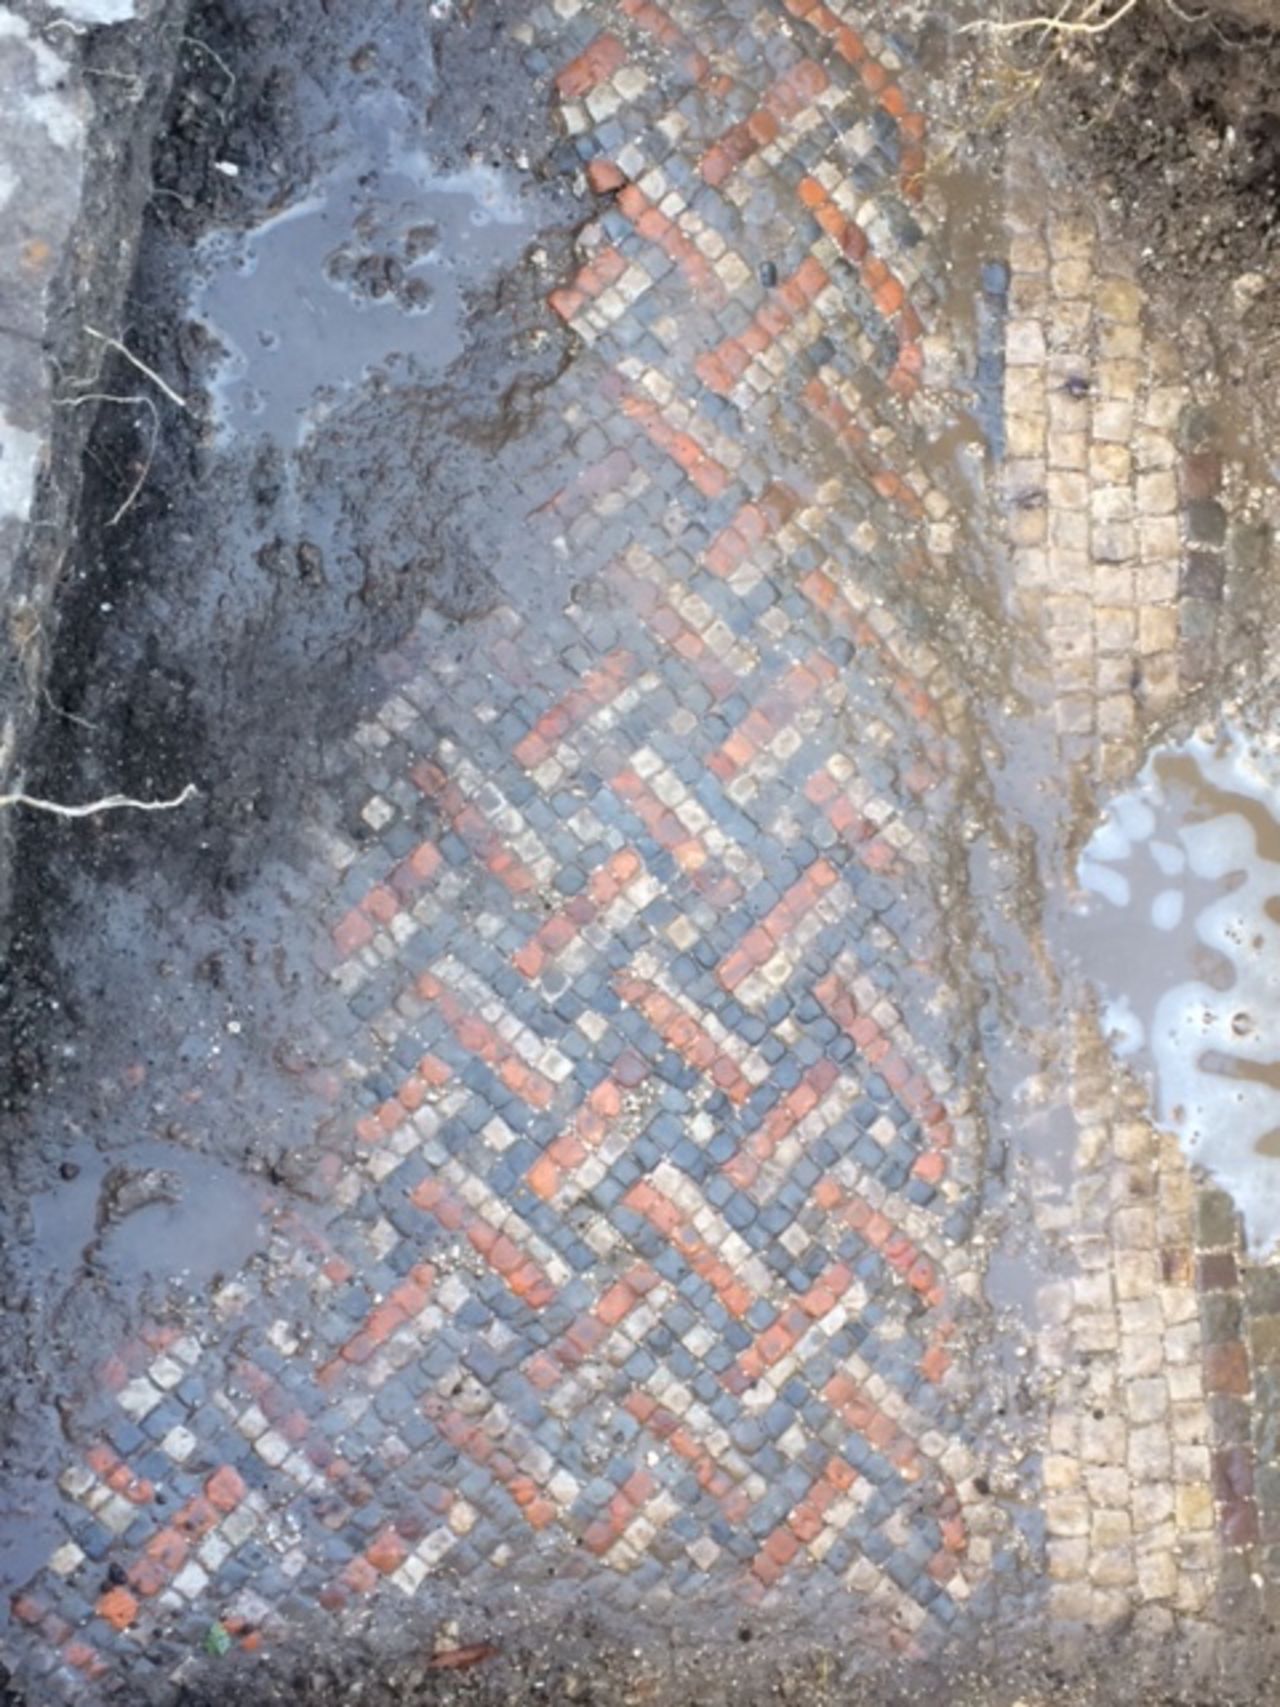 A grand Roman villa complex, undisturbed for more than 1,500 years, has been discovered on the grounds of a UK farmhouse after earthworks uncovered a well-preserved mosaic.